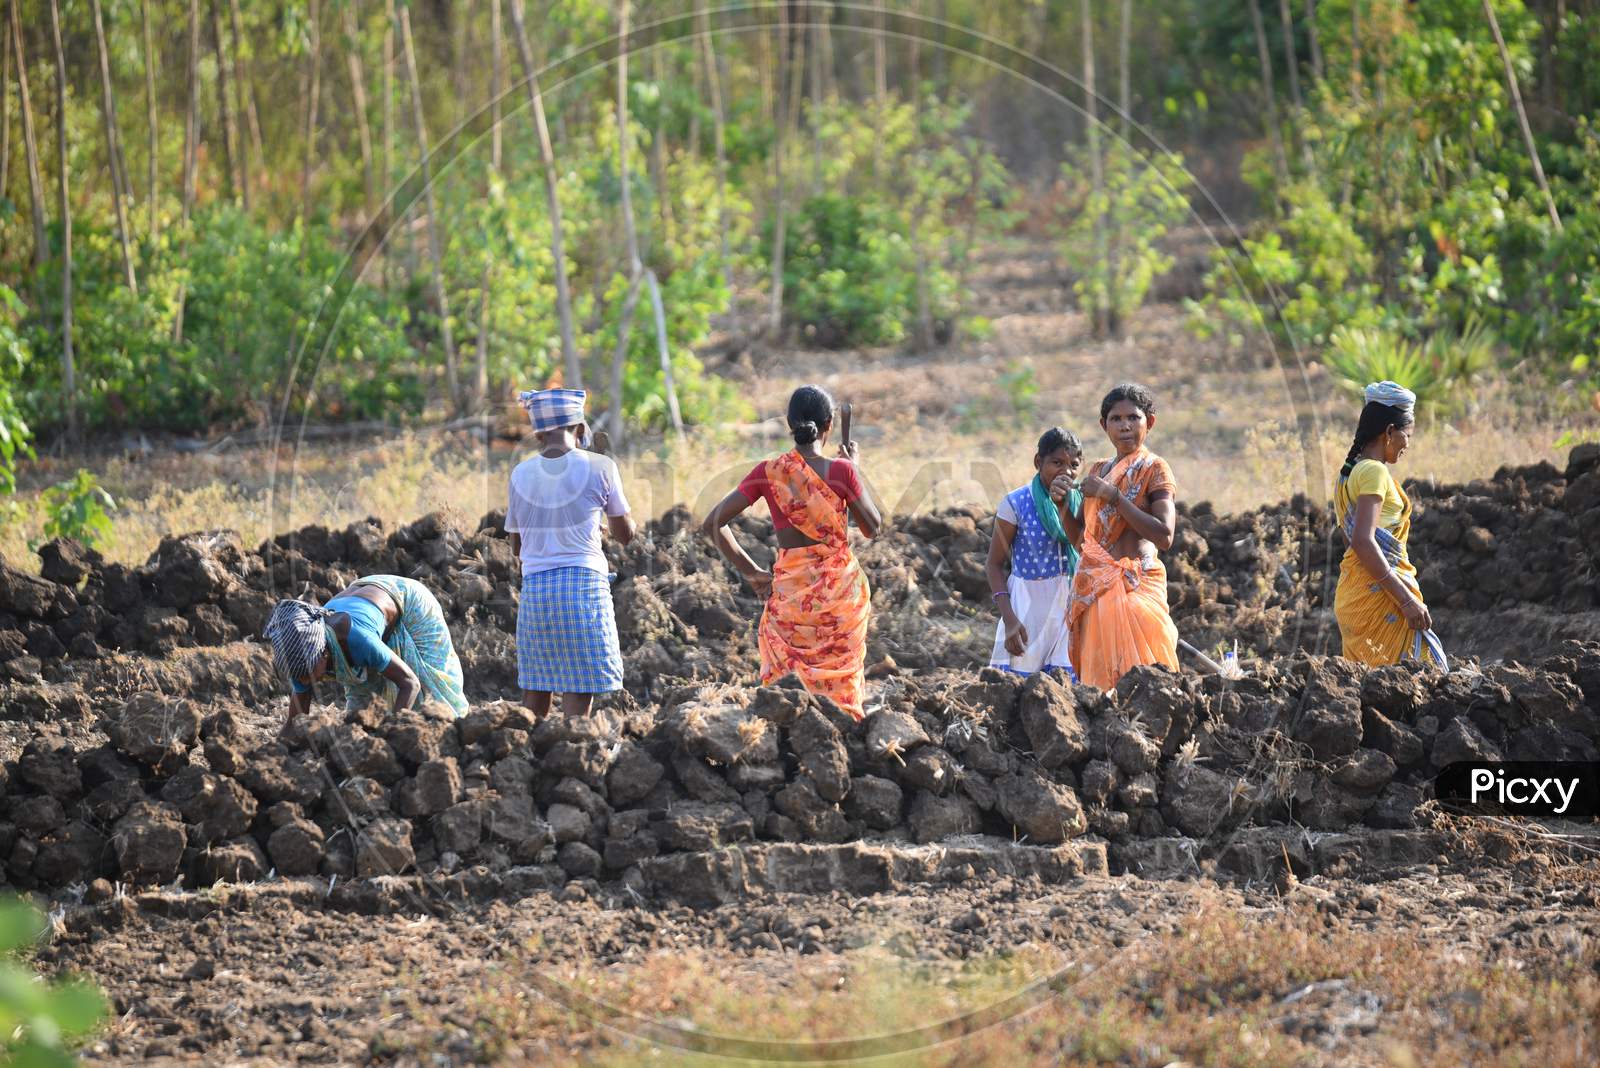 MGNREGS labourers clear the land for the cultivation of paddy crops at a field in Velairpadu, Andhra Pradesh, May 15, 2020.